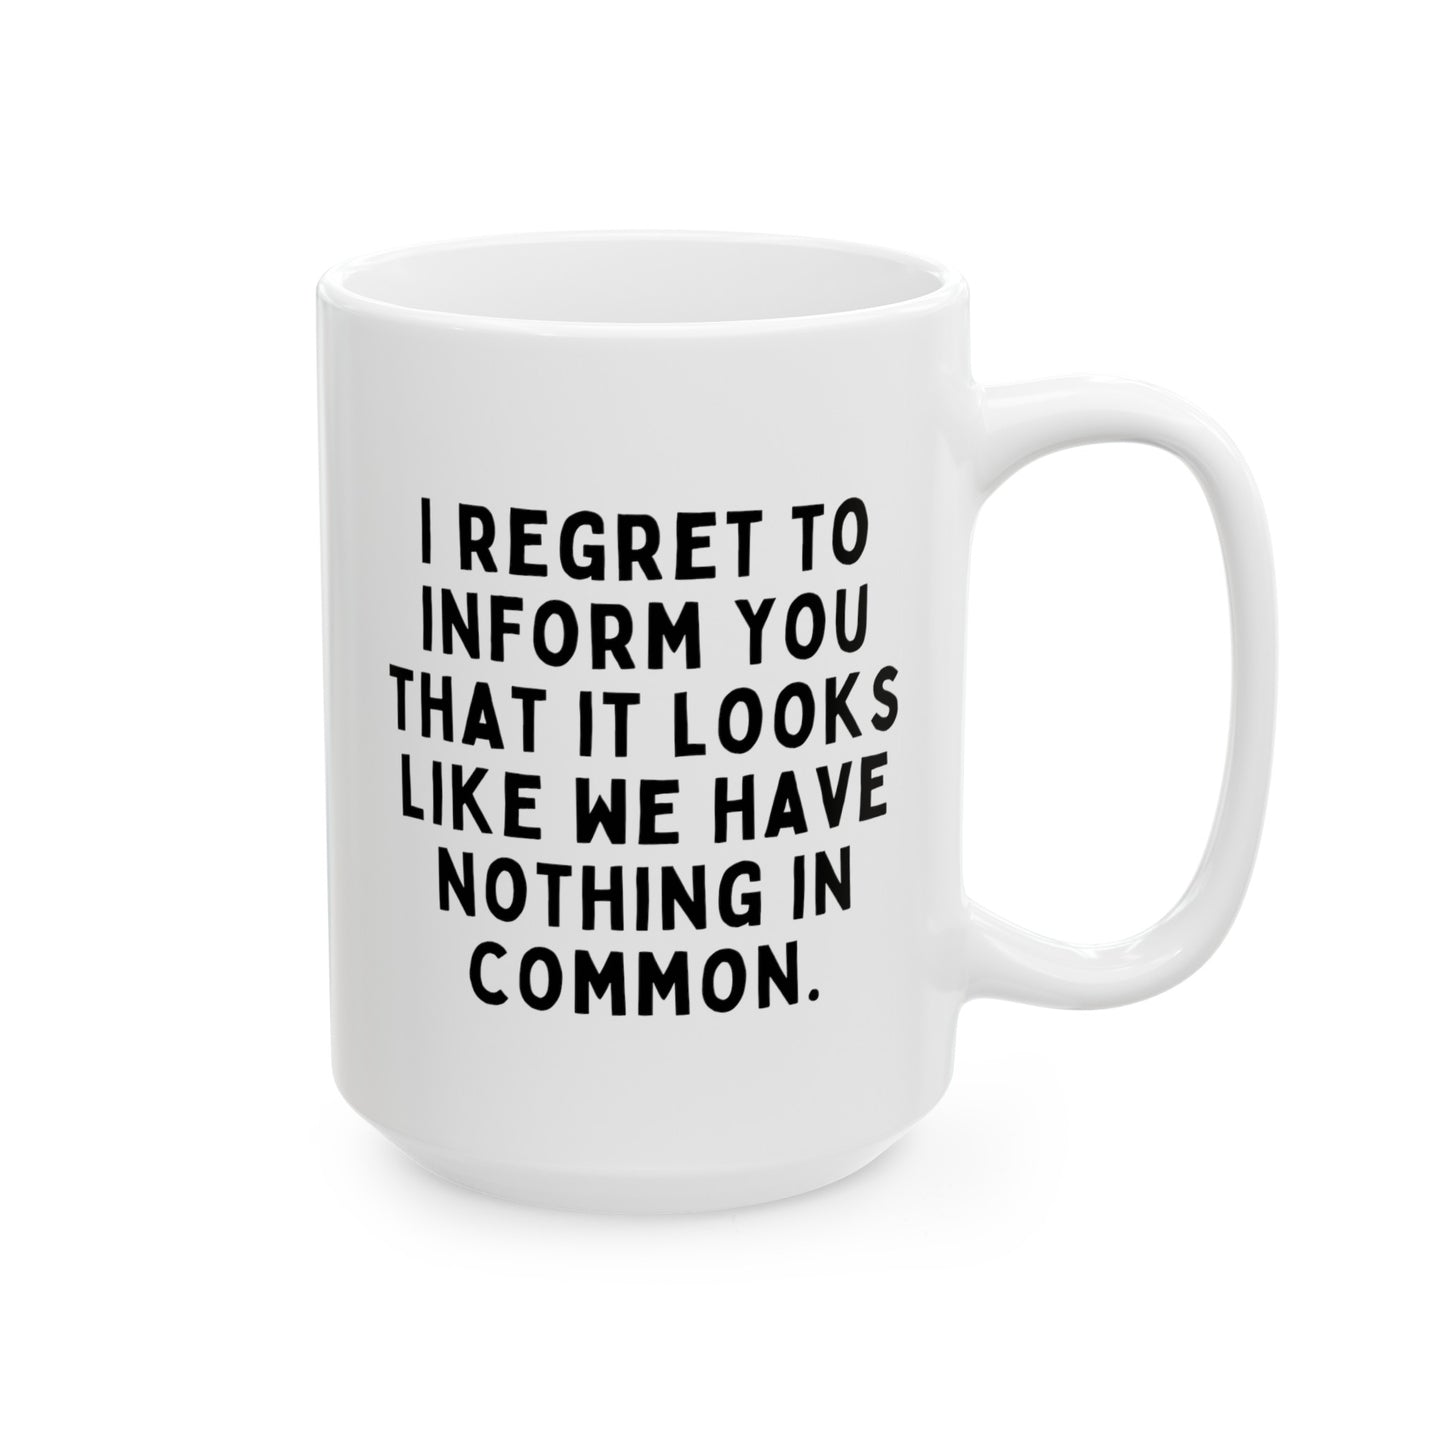 I Regret To Inform You That It Looks Like We Have Nothing In Common 15oz white funny large coffee mug gift for coworker best friend sarcastic sarcasm secret santa colleague waveywares wavey wares wavywares wavy wares